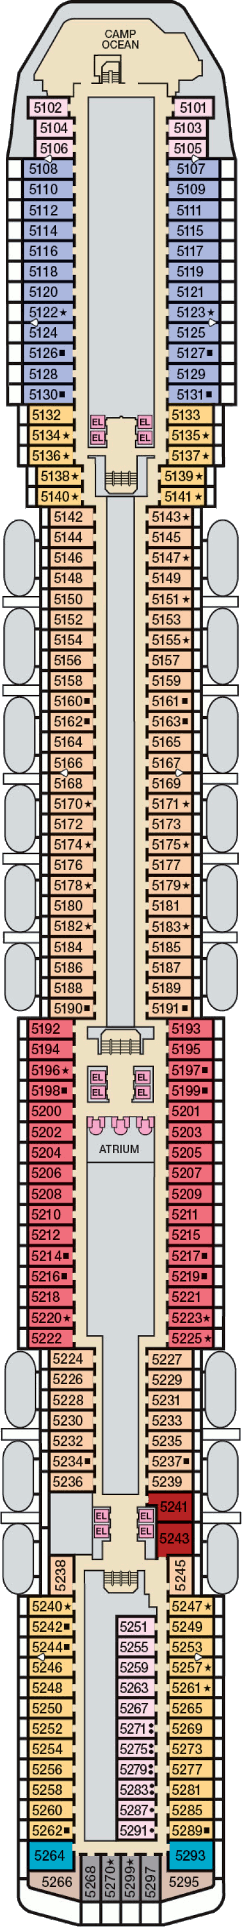 Carnival Miracle Upper Deck Deck Plan